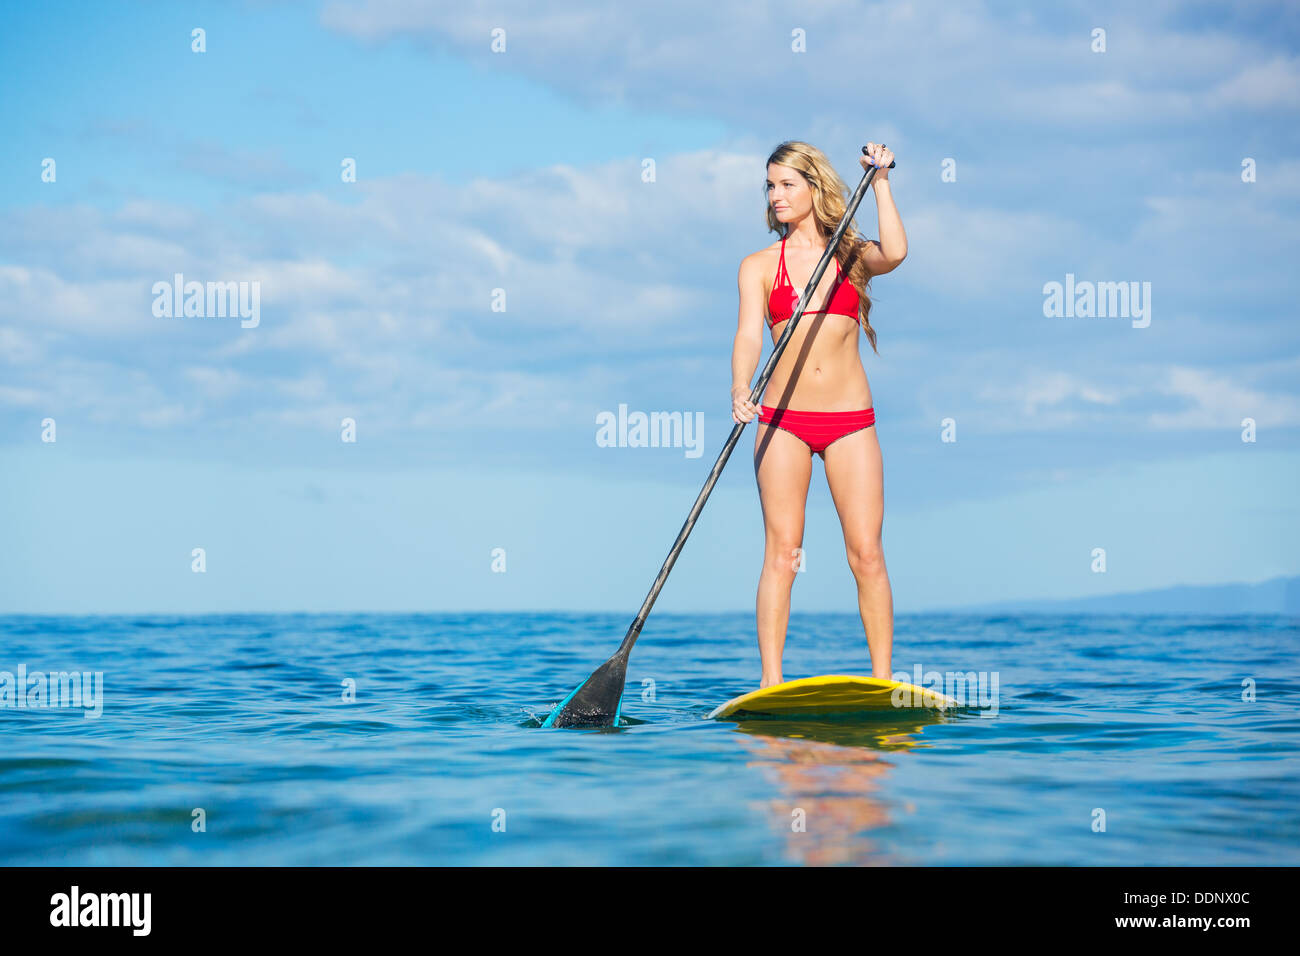 Attractive Woman on Stand Up Paddle Board, SUP, Tropical Blue Ocean, Hawaii Stock Photo